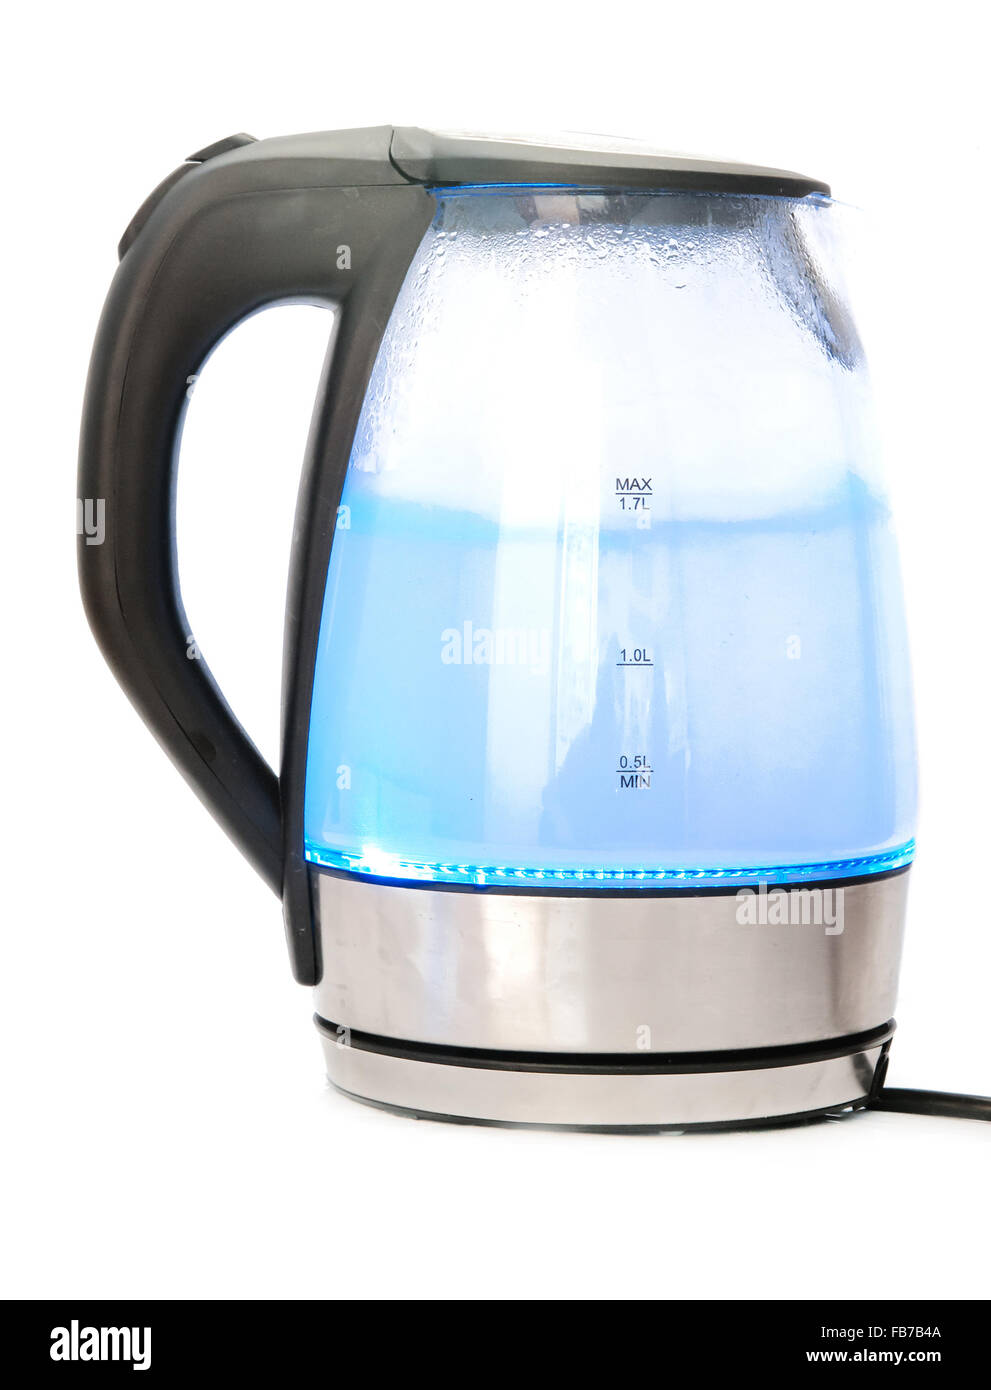 https://c8.alamy.com/comp/FB7B4A/glass-electric-kettle-with-boiling-water-isolated-on-white-FB7B4A.jpg